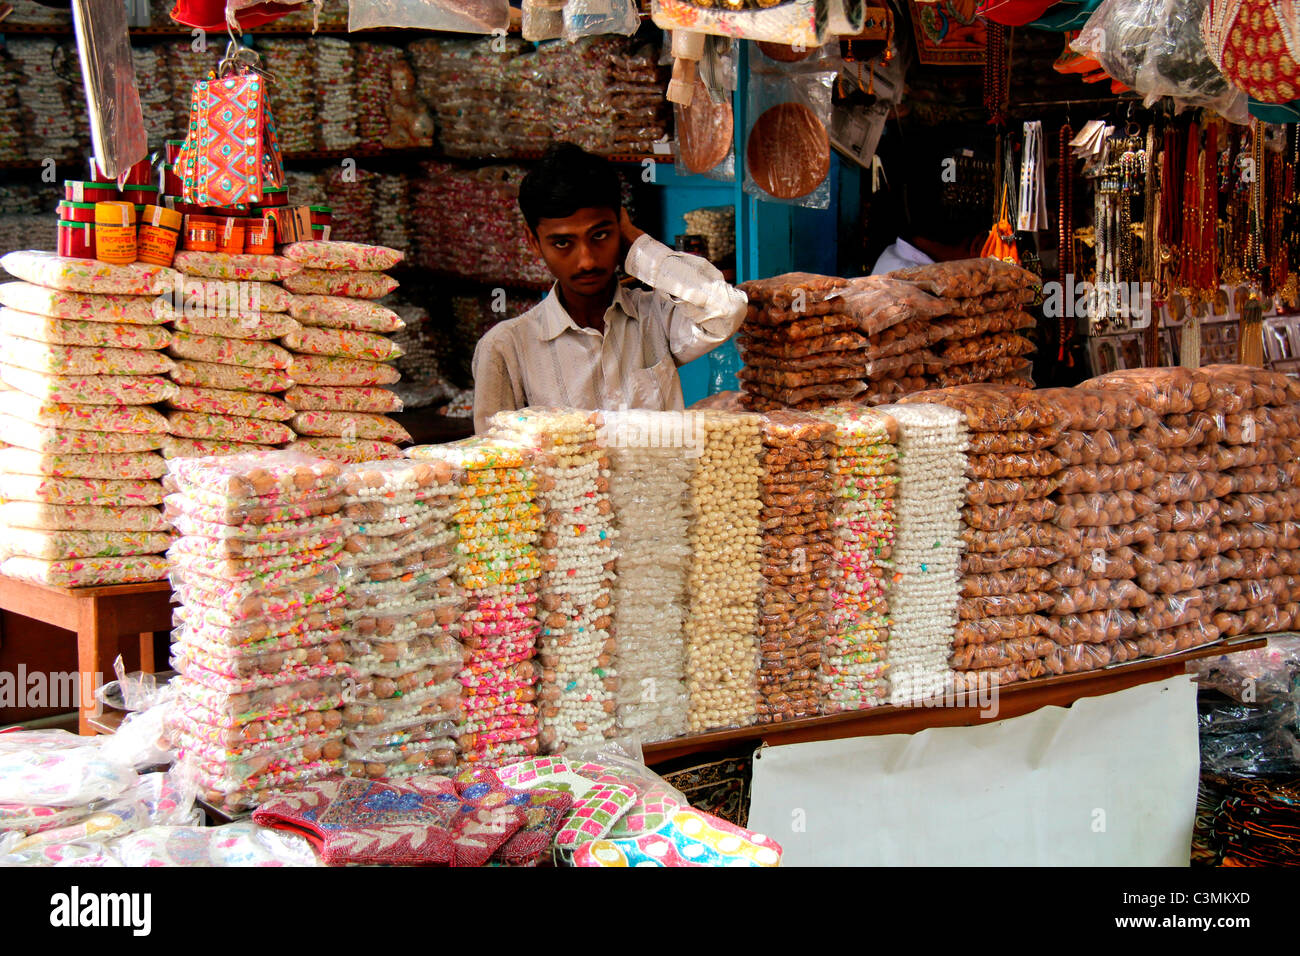 A provision store in India Stock Photo